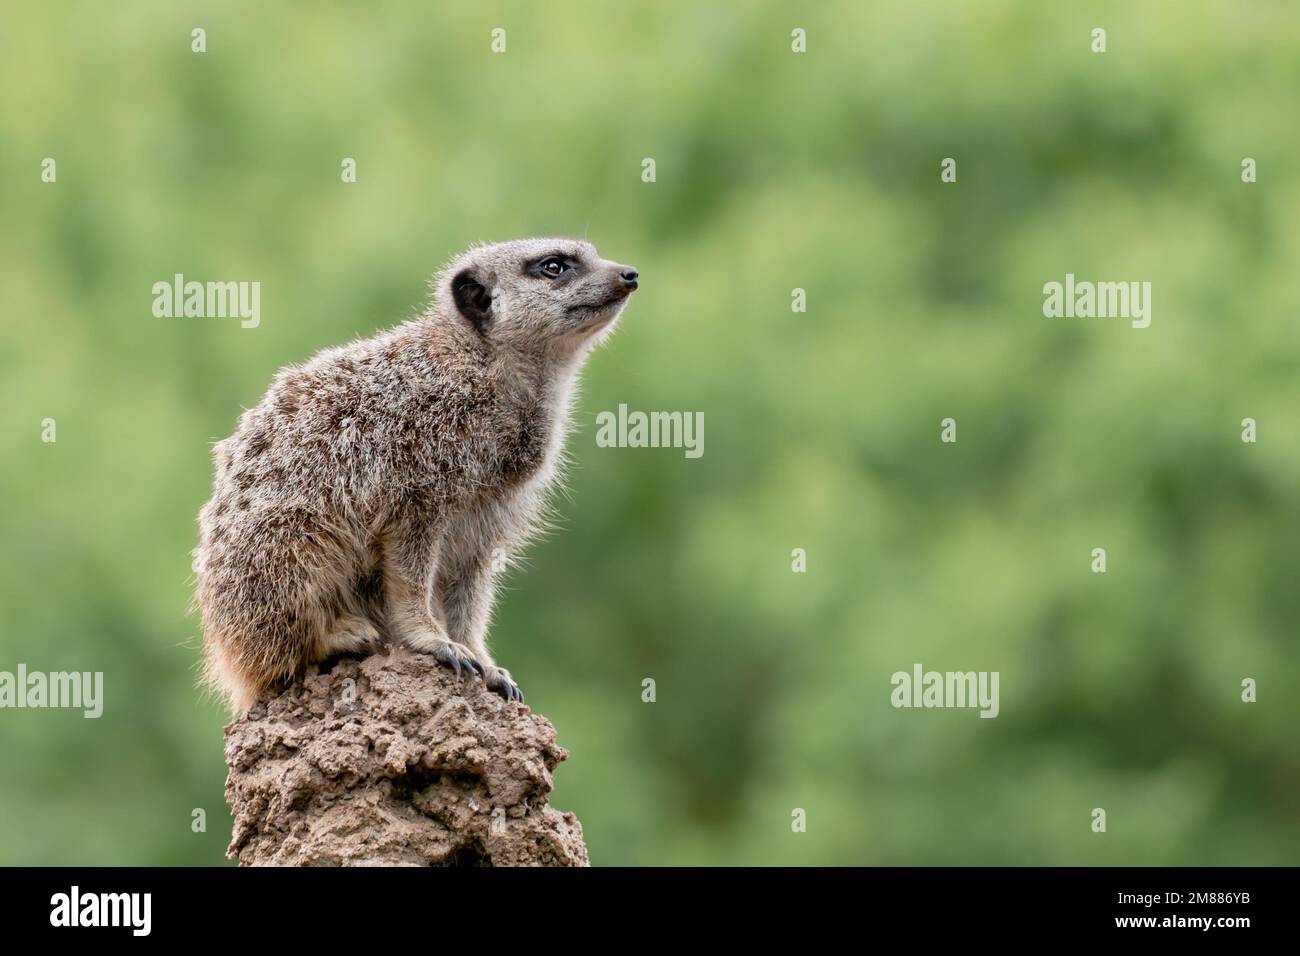 Meerkat on mound looking right with copy space Stock Photo